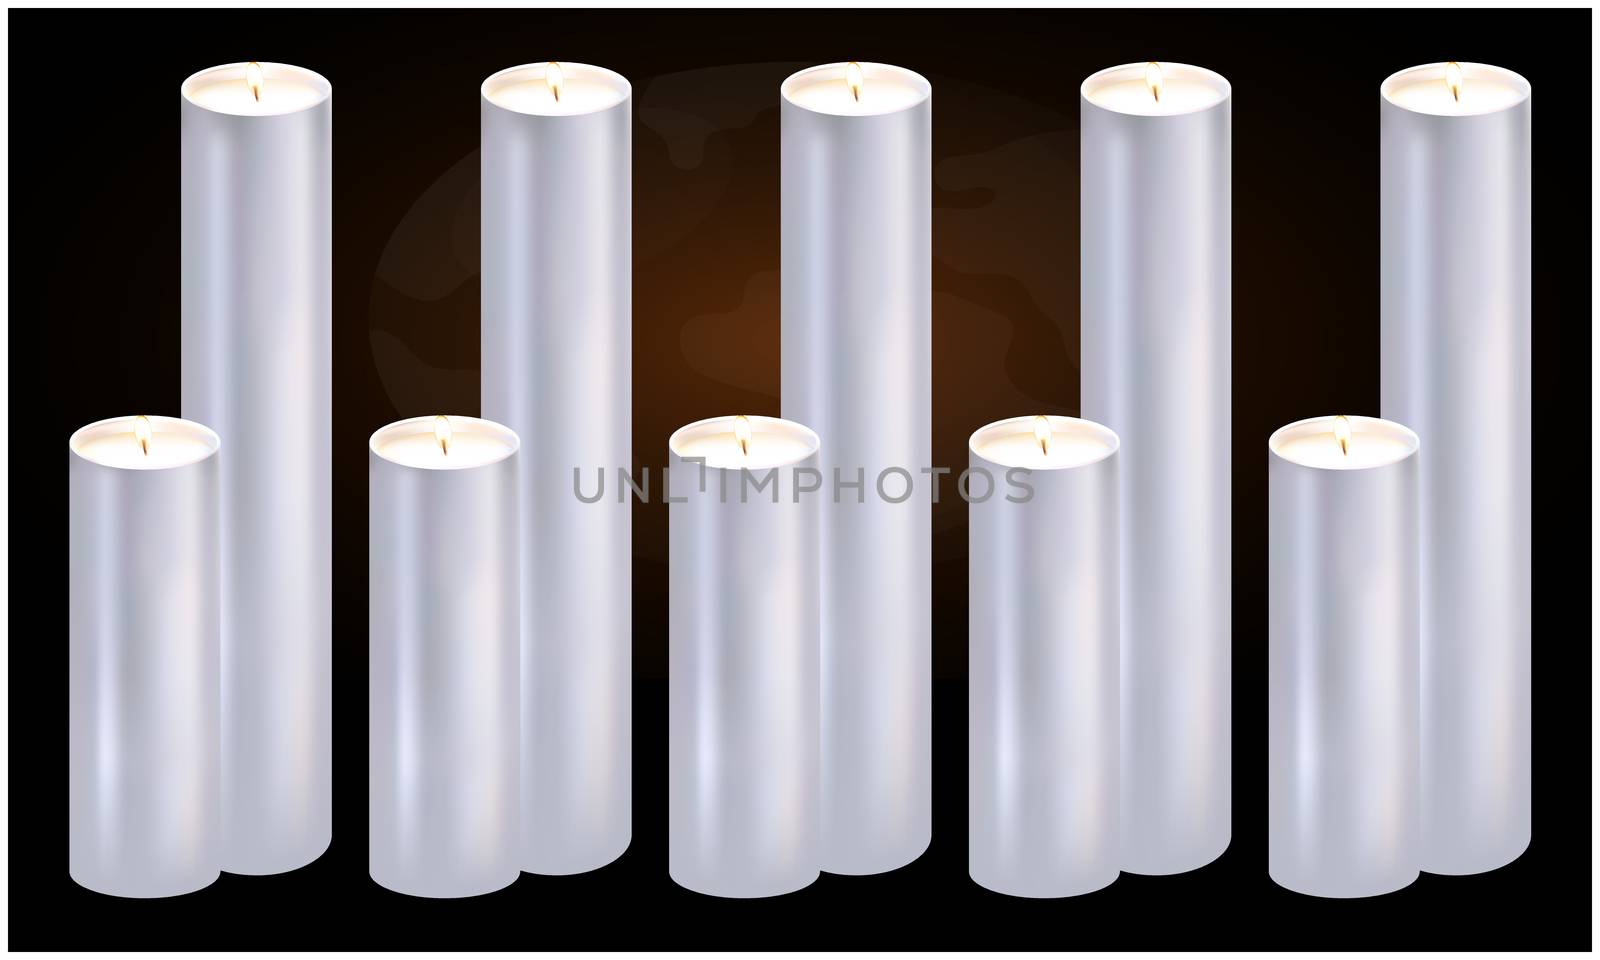 several burning candles on abstract dark background by aanavcreationsplus